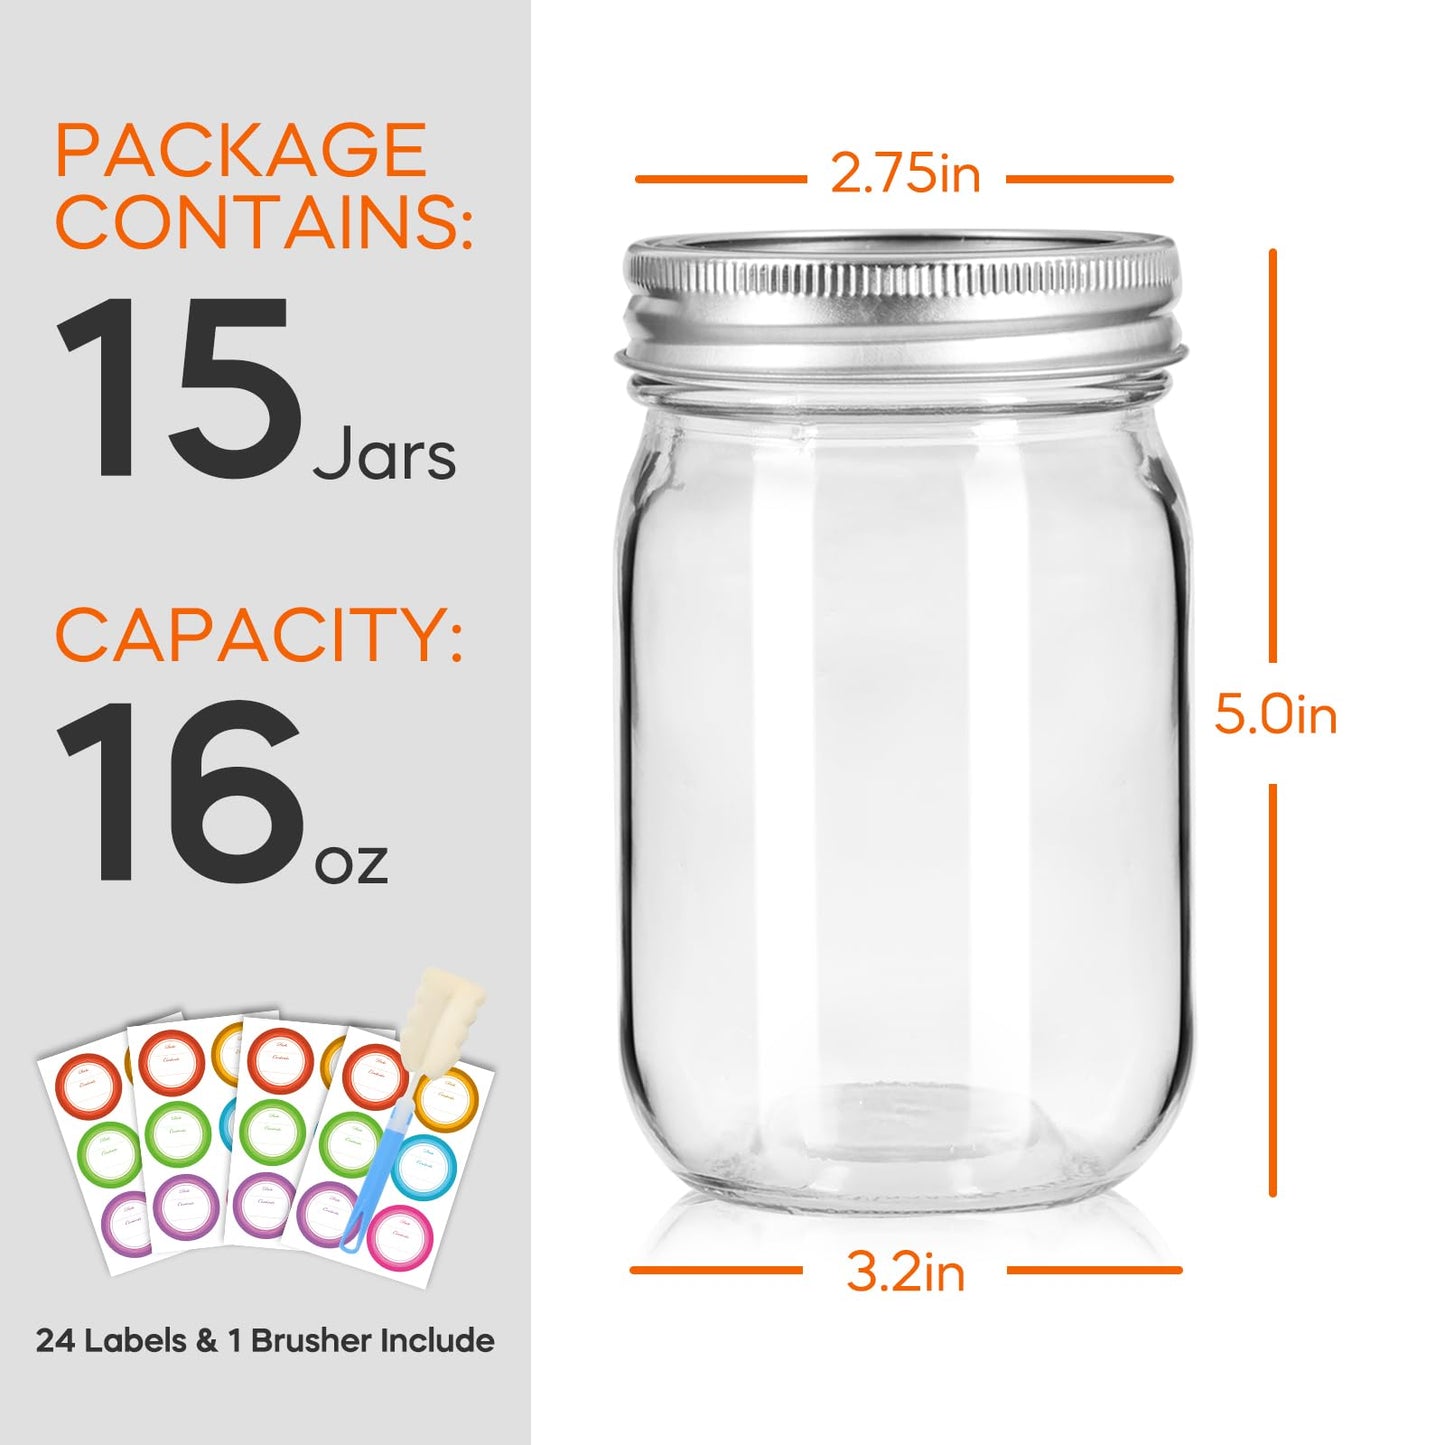 Mcupper Mason Jars 16 oz with Lids and Bands, 15 Pack Regular Mouth Canning Jars, Clear Glass Jars for Canning, Food Storage and Fermenting, Labels & Brusher Included - Microwave & Dishwasher Safe